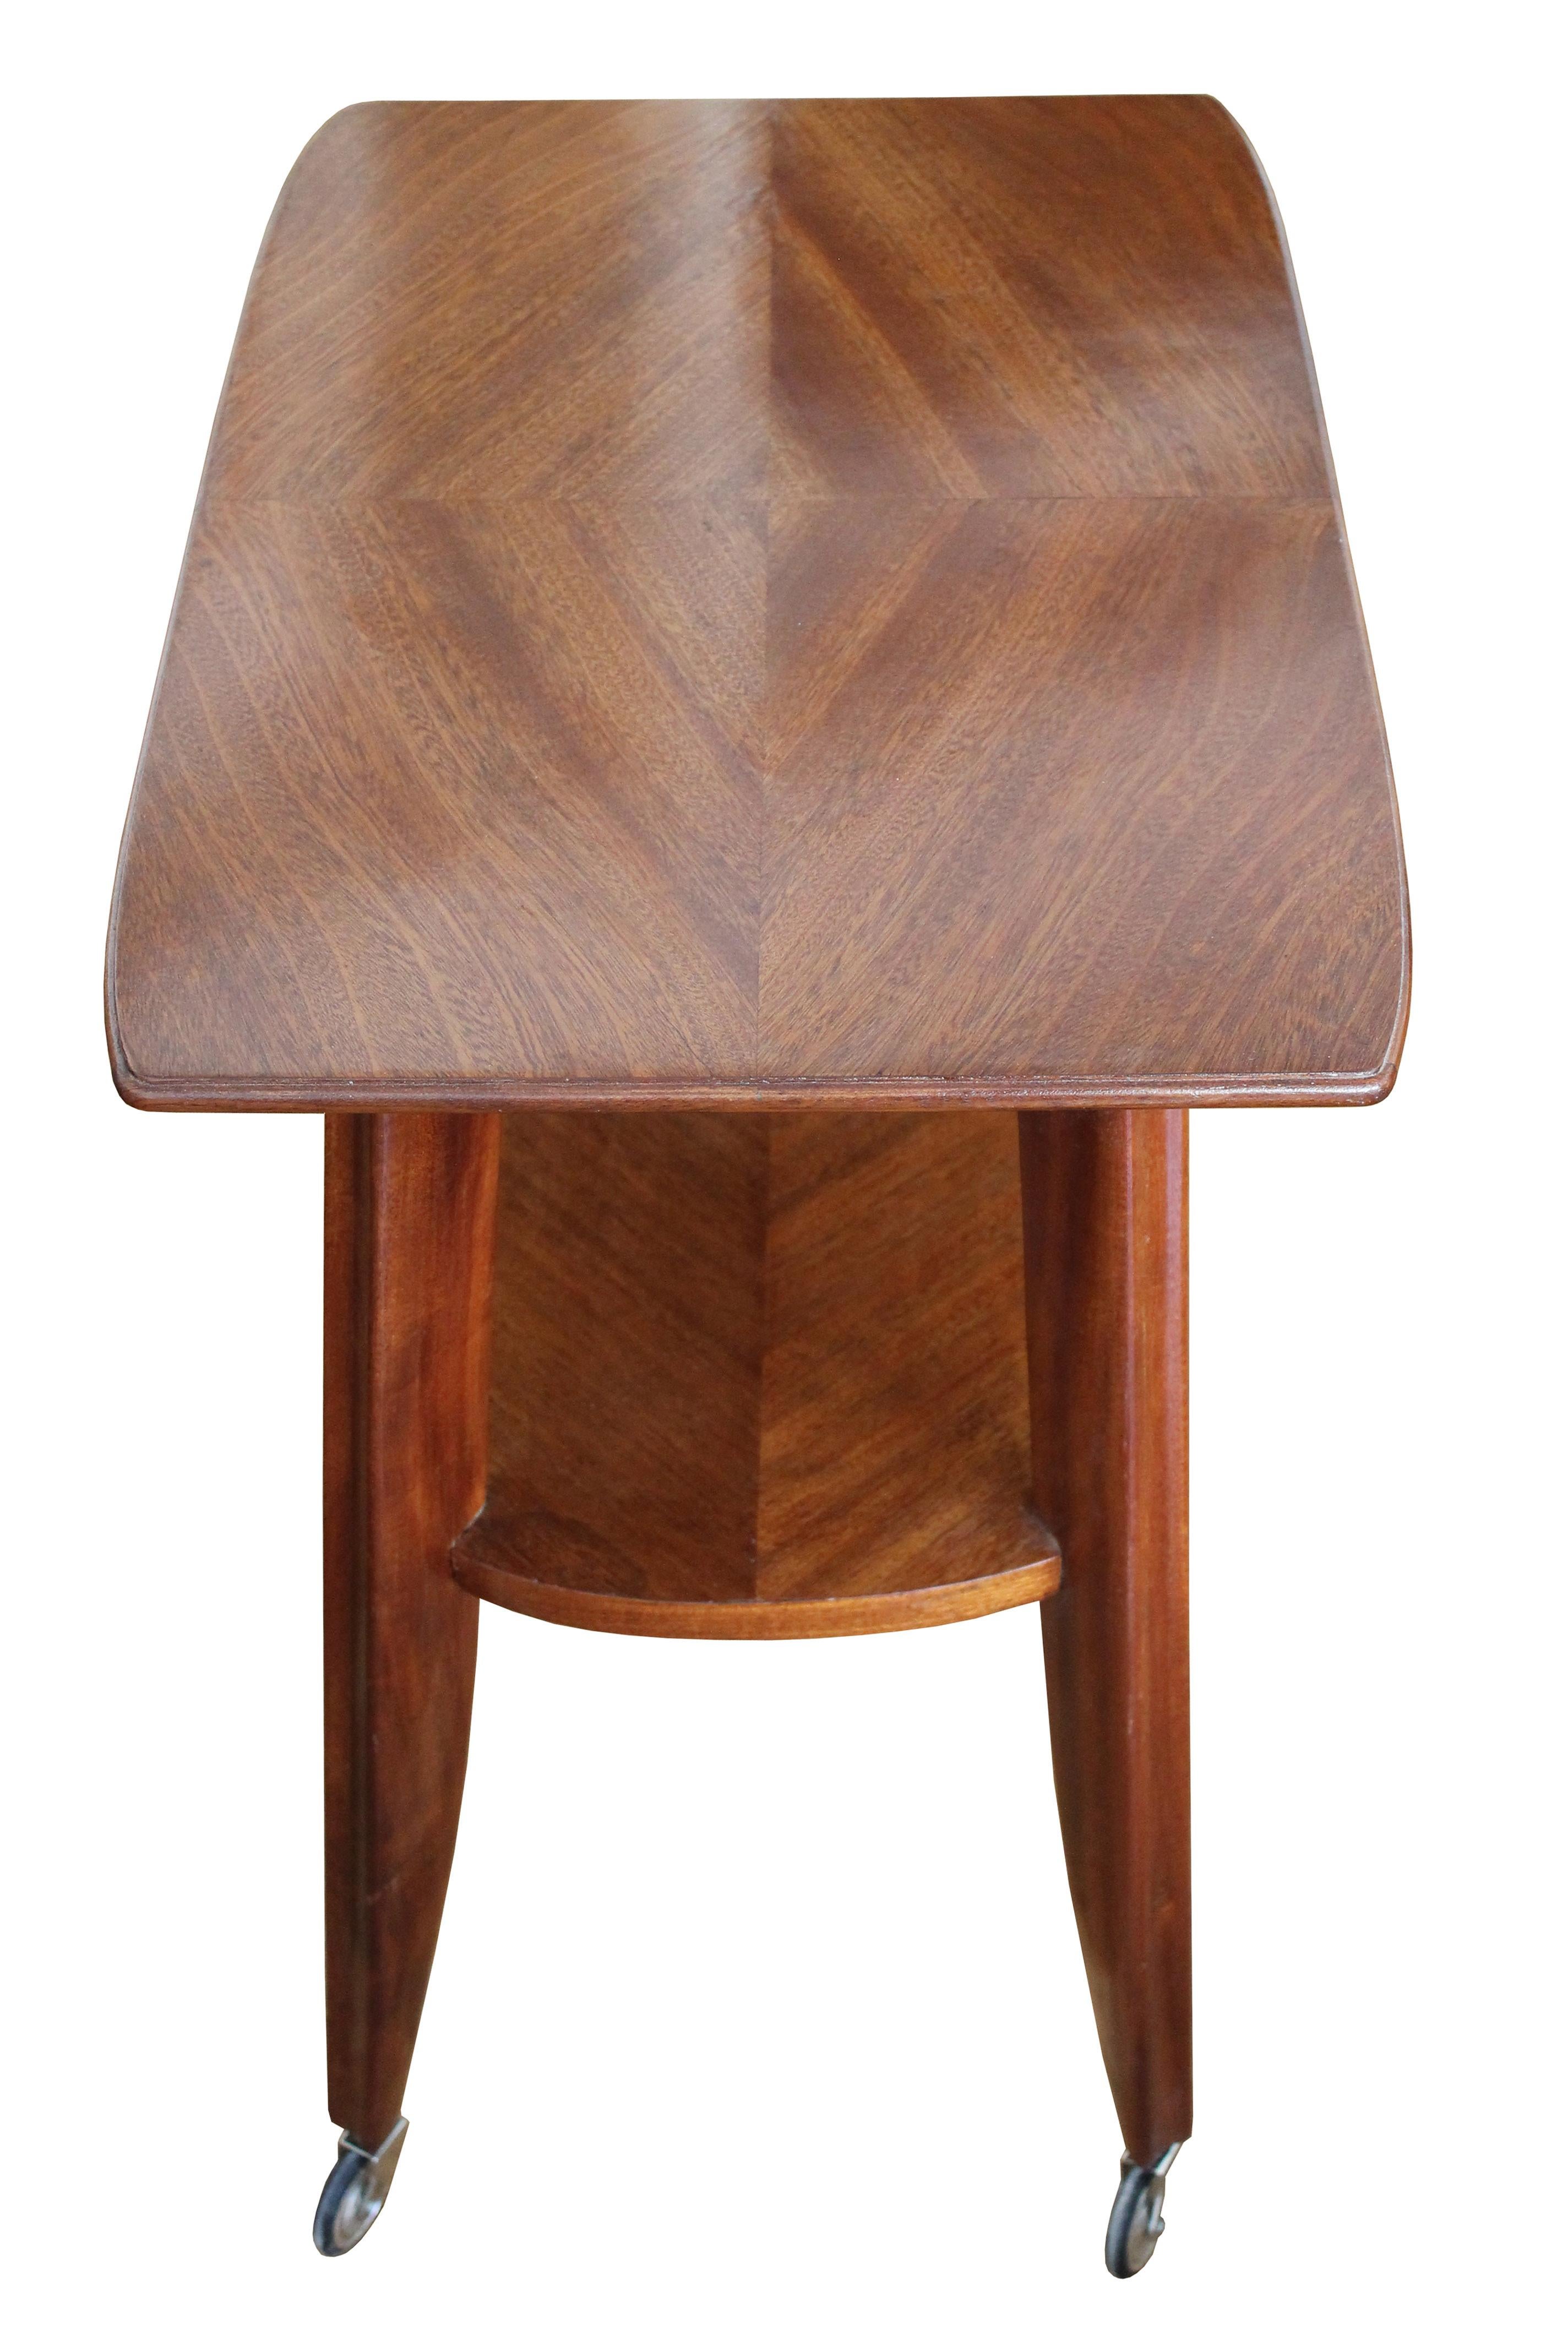 A stunning serving table on caster wheels, made entirely of mahogany wood. 

What makes this piece really stand out is the elegant gentle curves and the rich texture of the mahogany wood on both the top of the piece and the lower shelf. The top